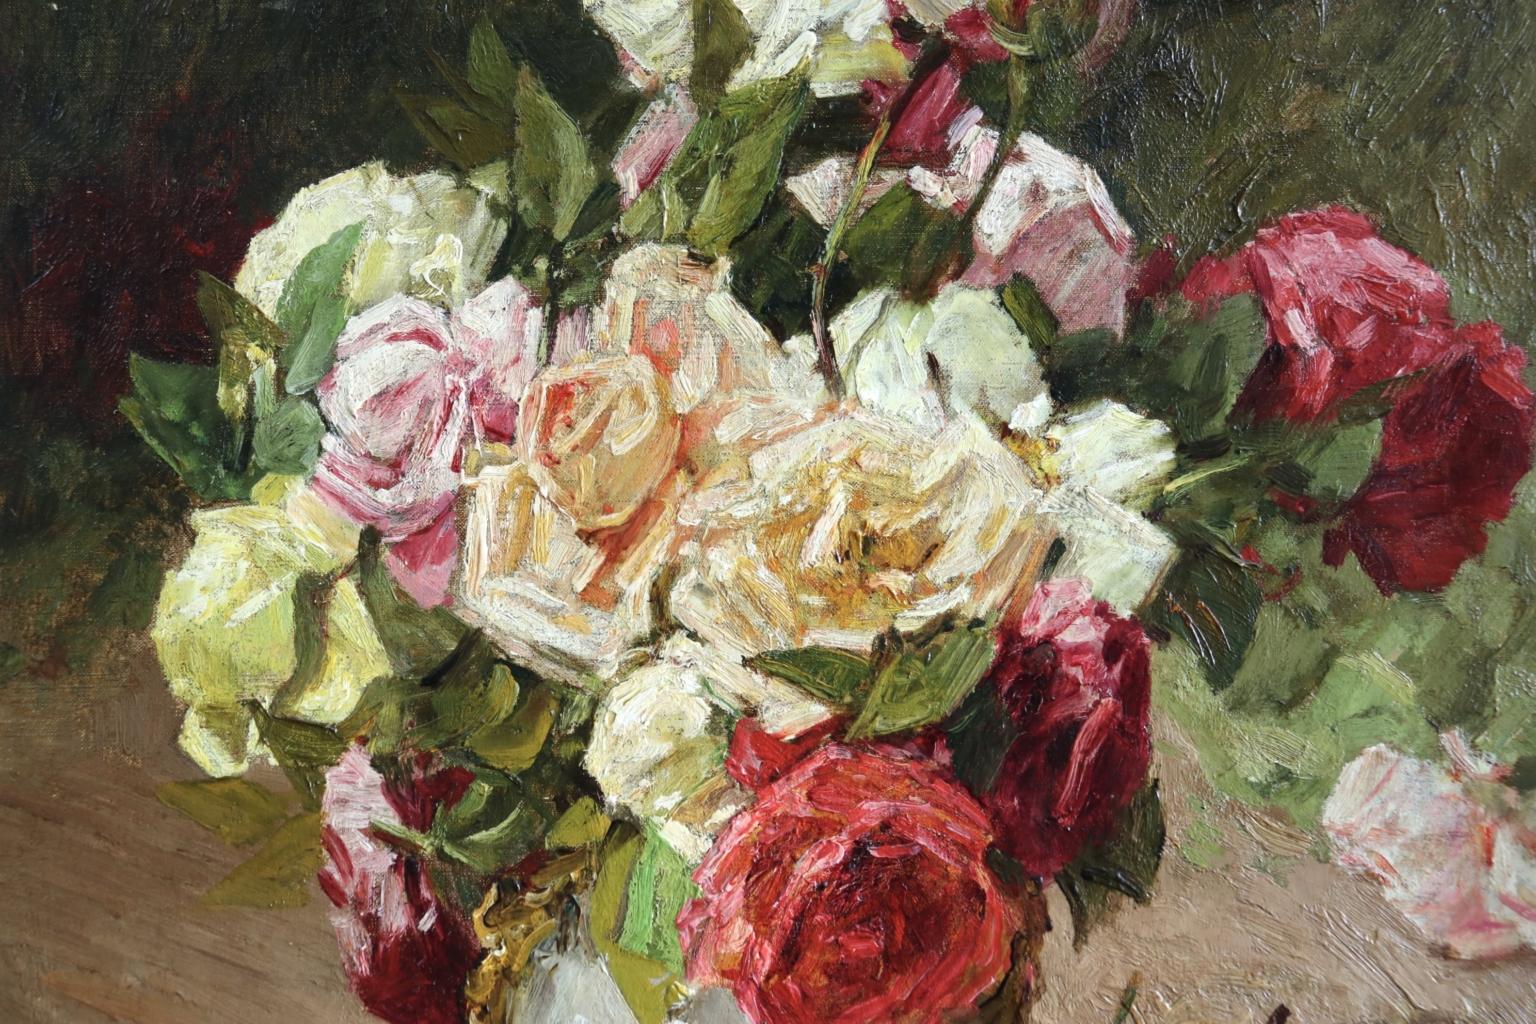 A wonderful oil on canvas by Georges Jeannin depicting a ceramic vase filled with red, pink, cream and peach coloured roses in an interior. Signed and dated 1910 lower left. Framed dimensions are 30 inches high by 26 inches